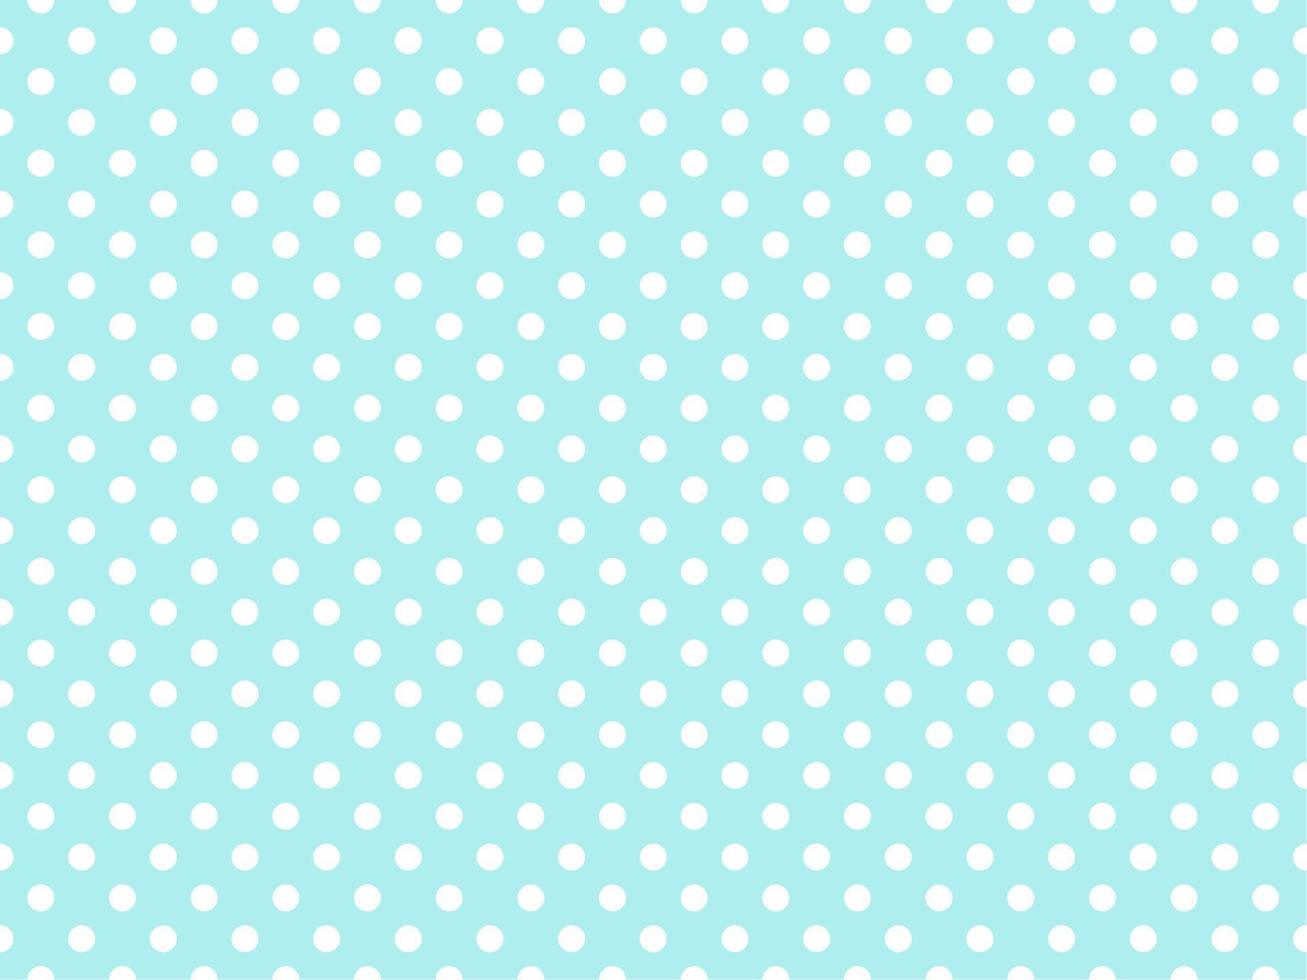 white polka dots over pale turquoise background vector